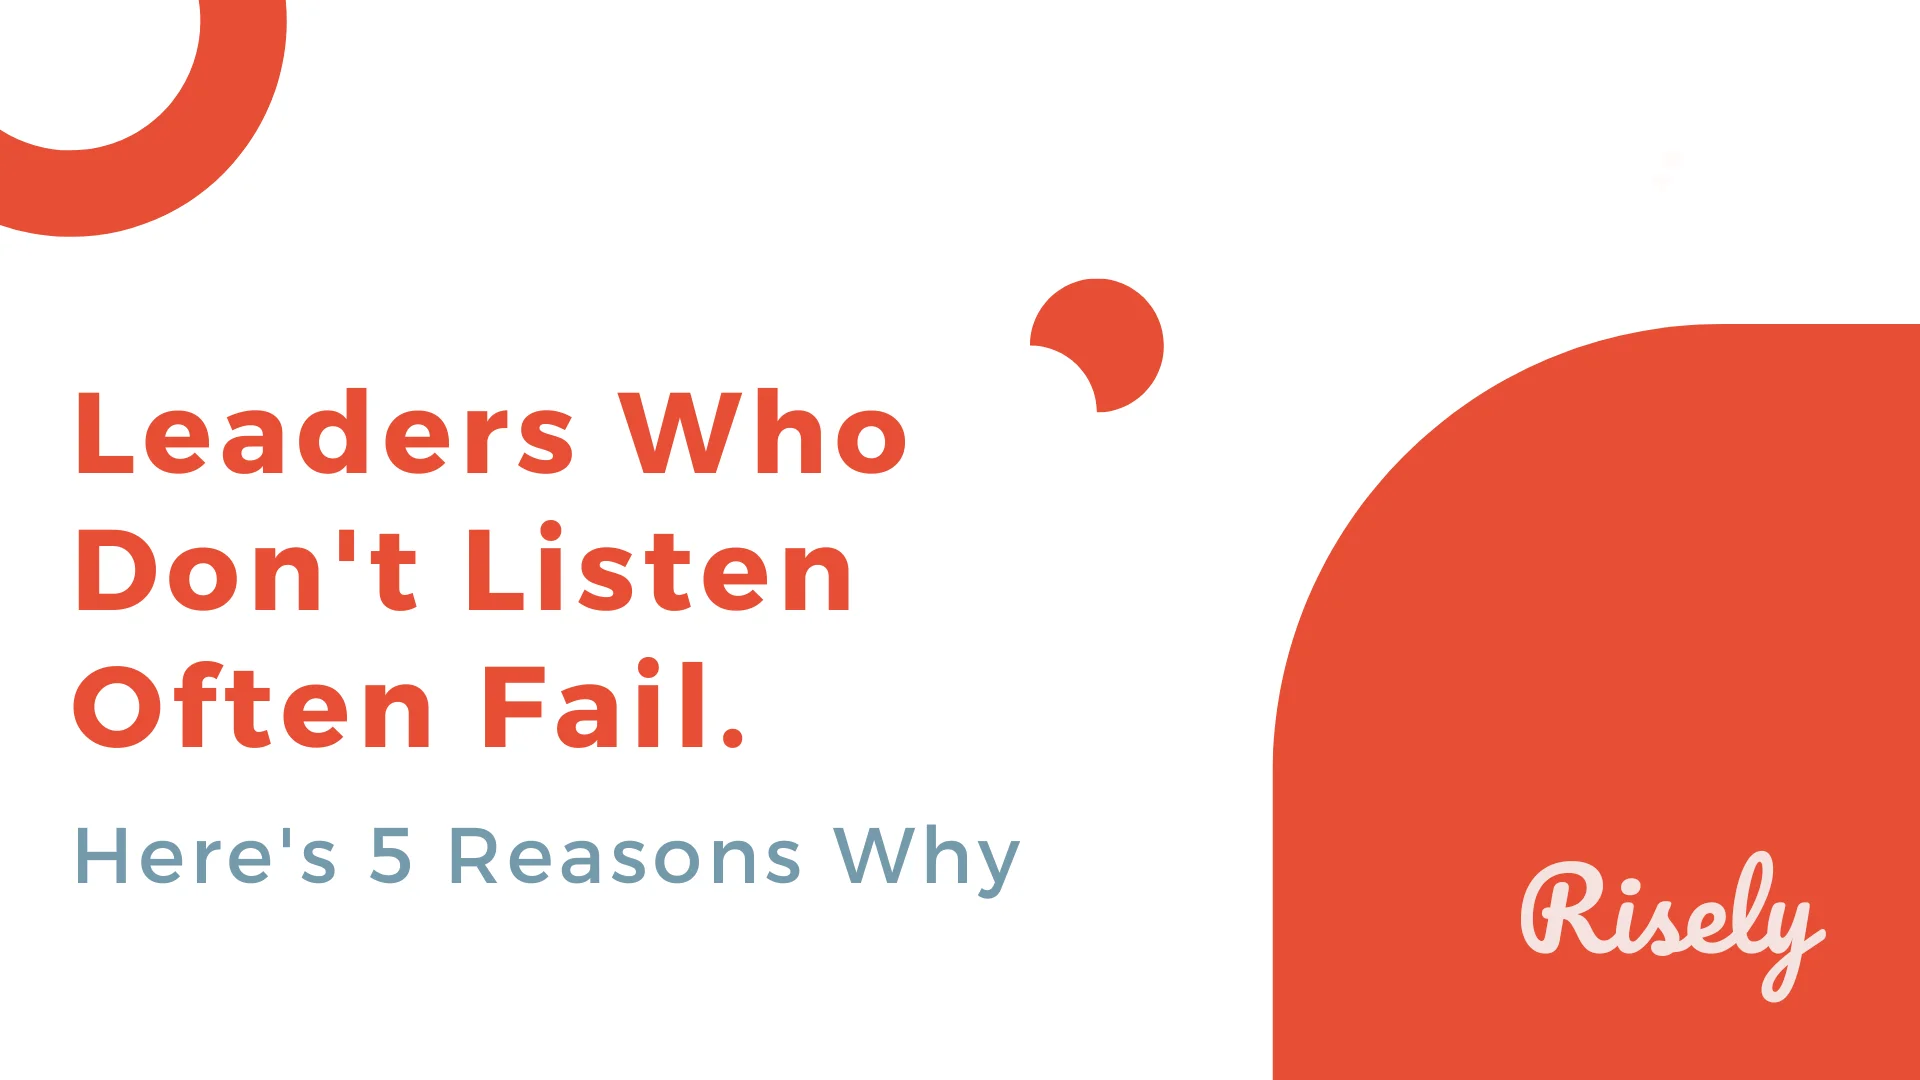 Leaders Who Don’t Listen Often Fail. Here’s 5 Reasons Why